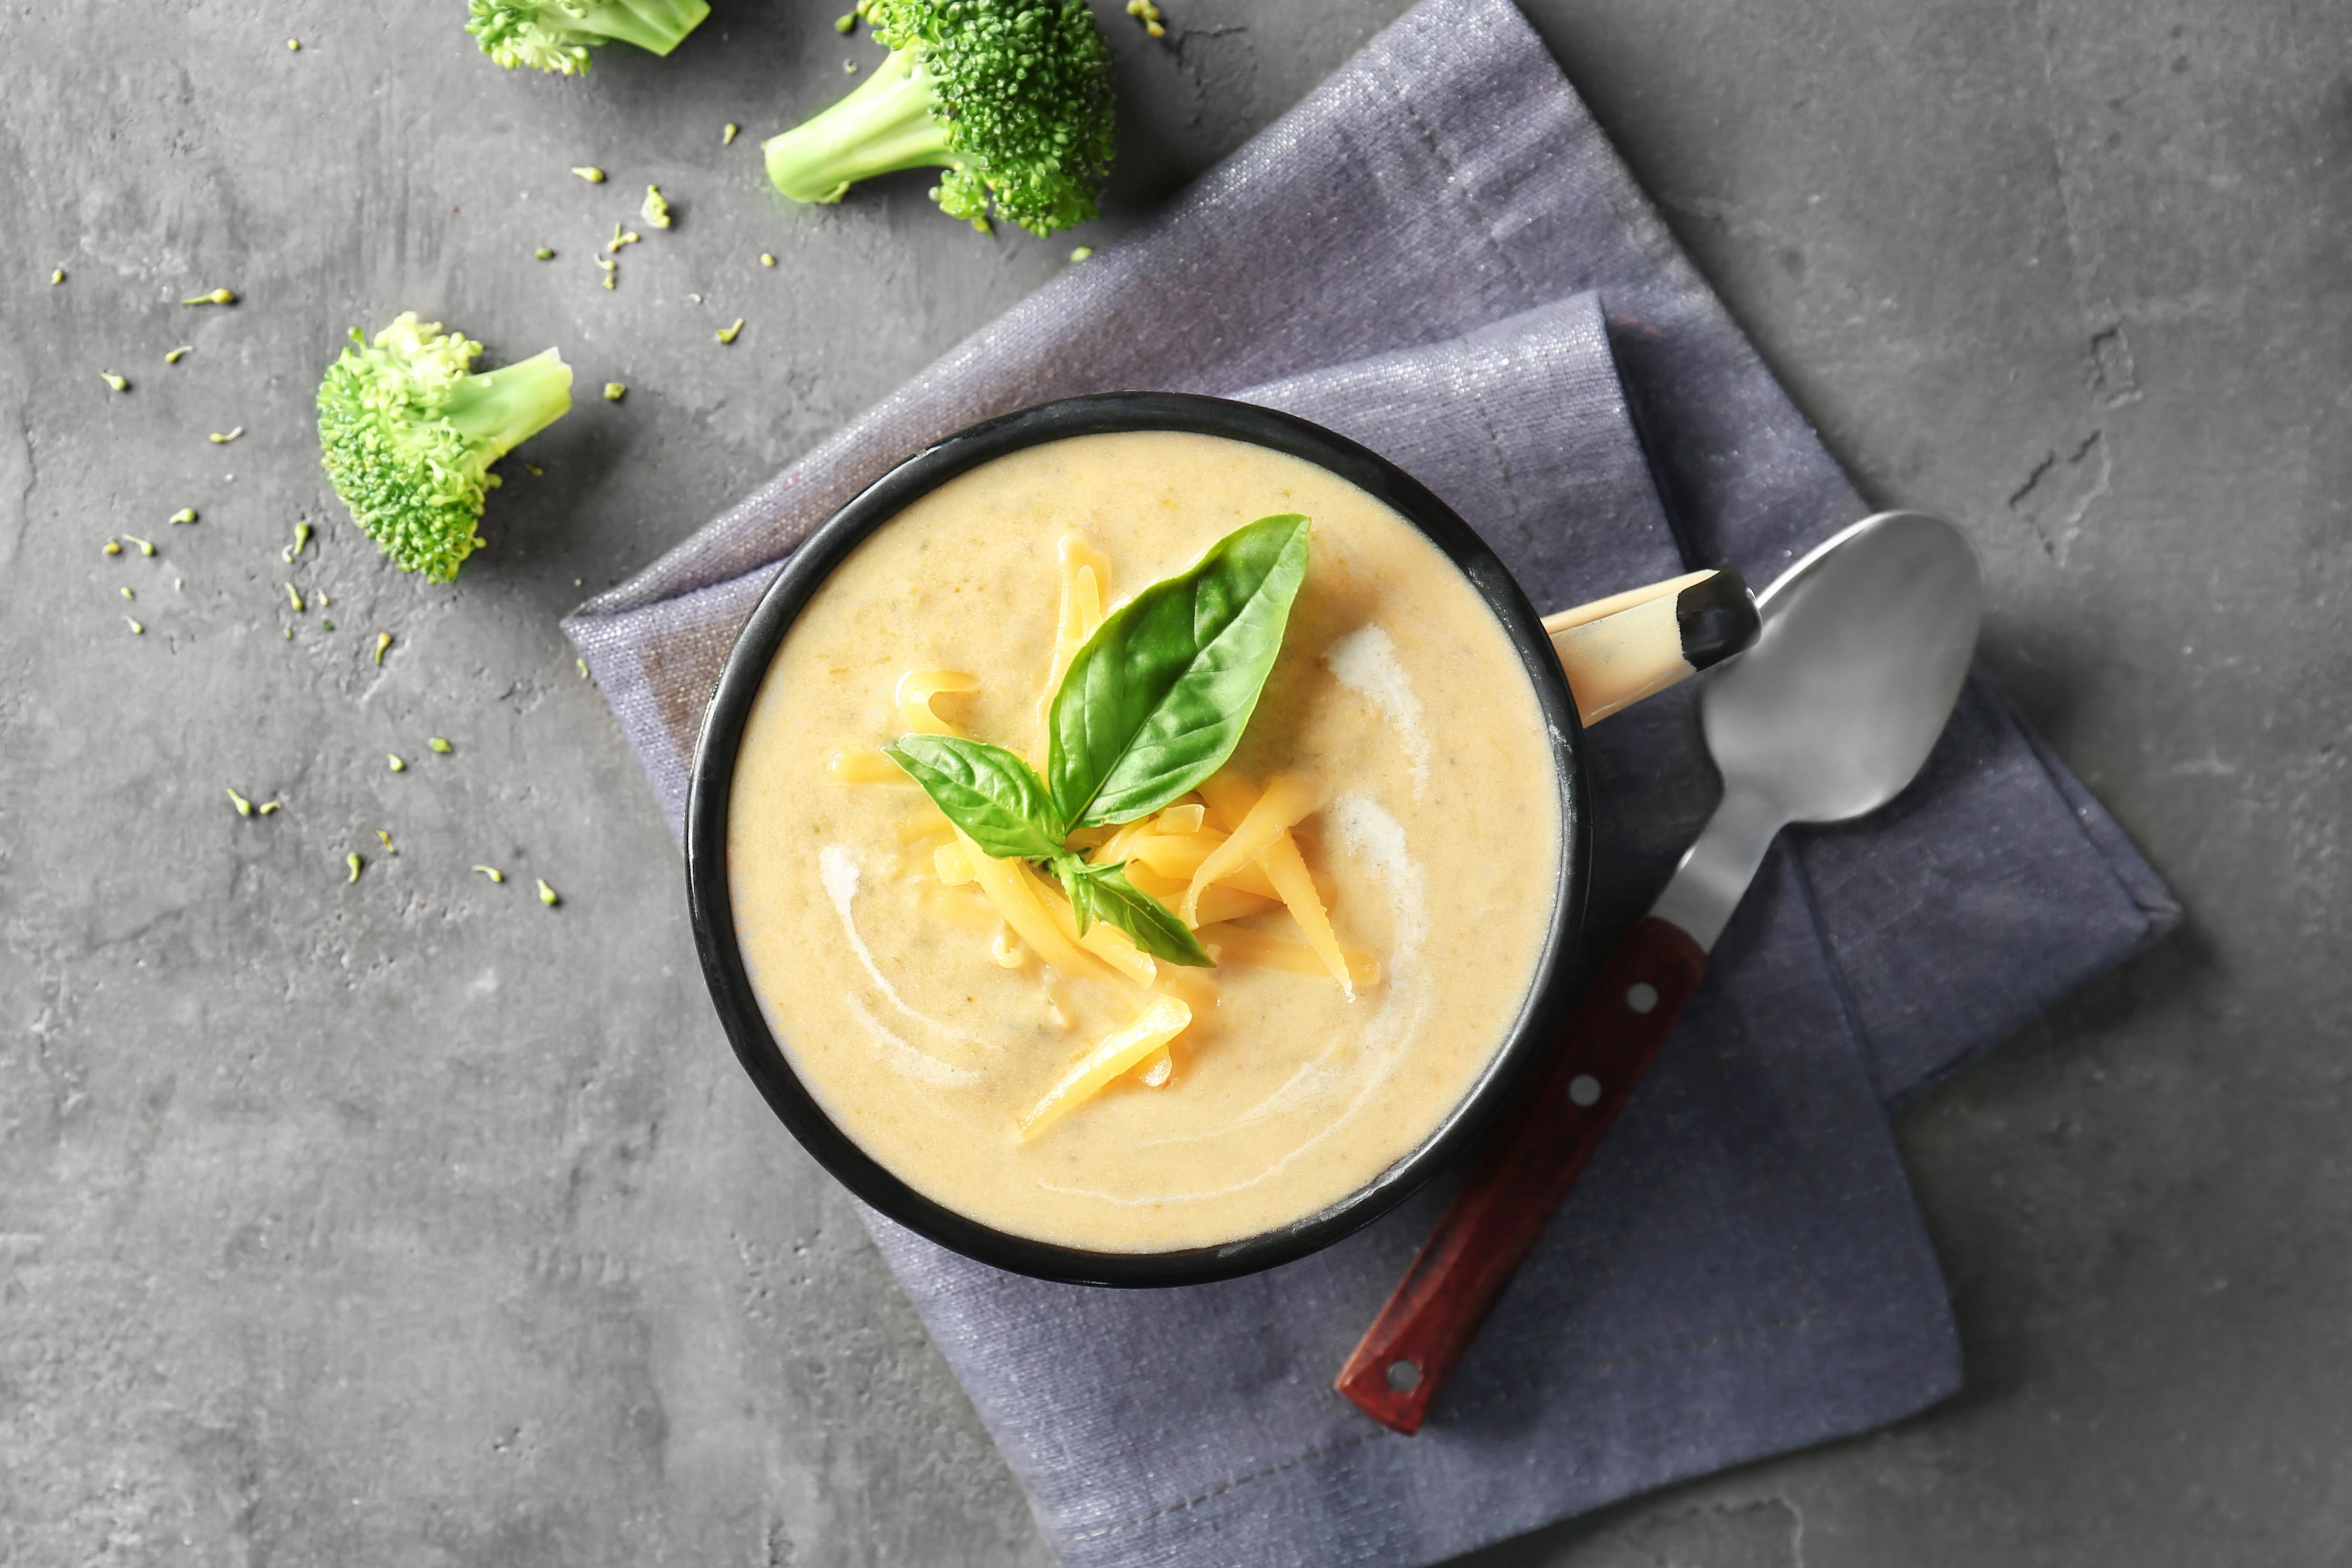 prepared meals nutritionists avoid | soup